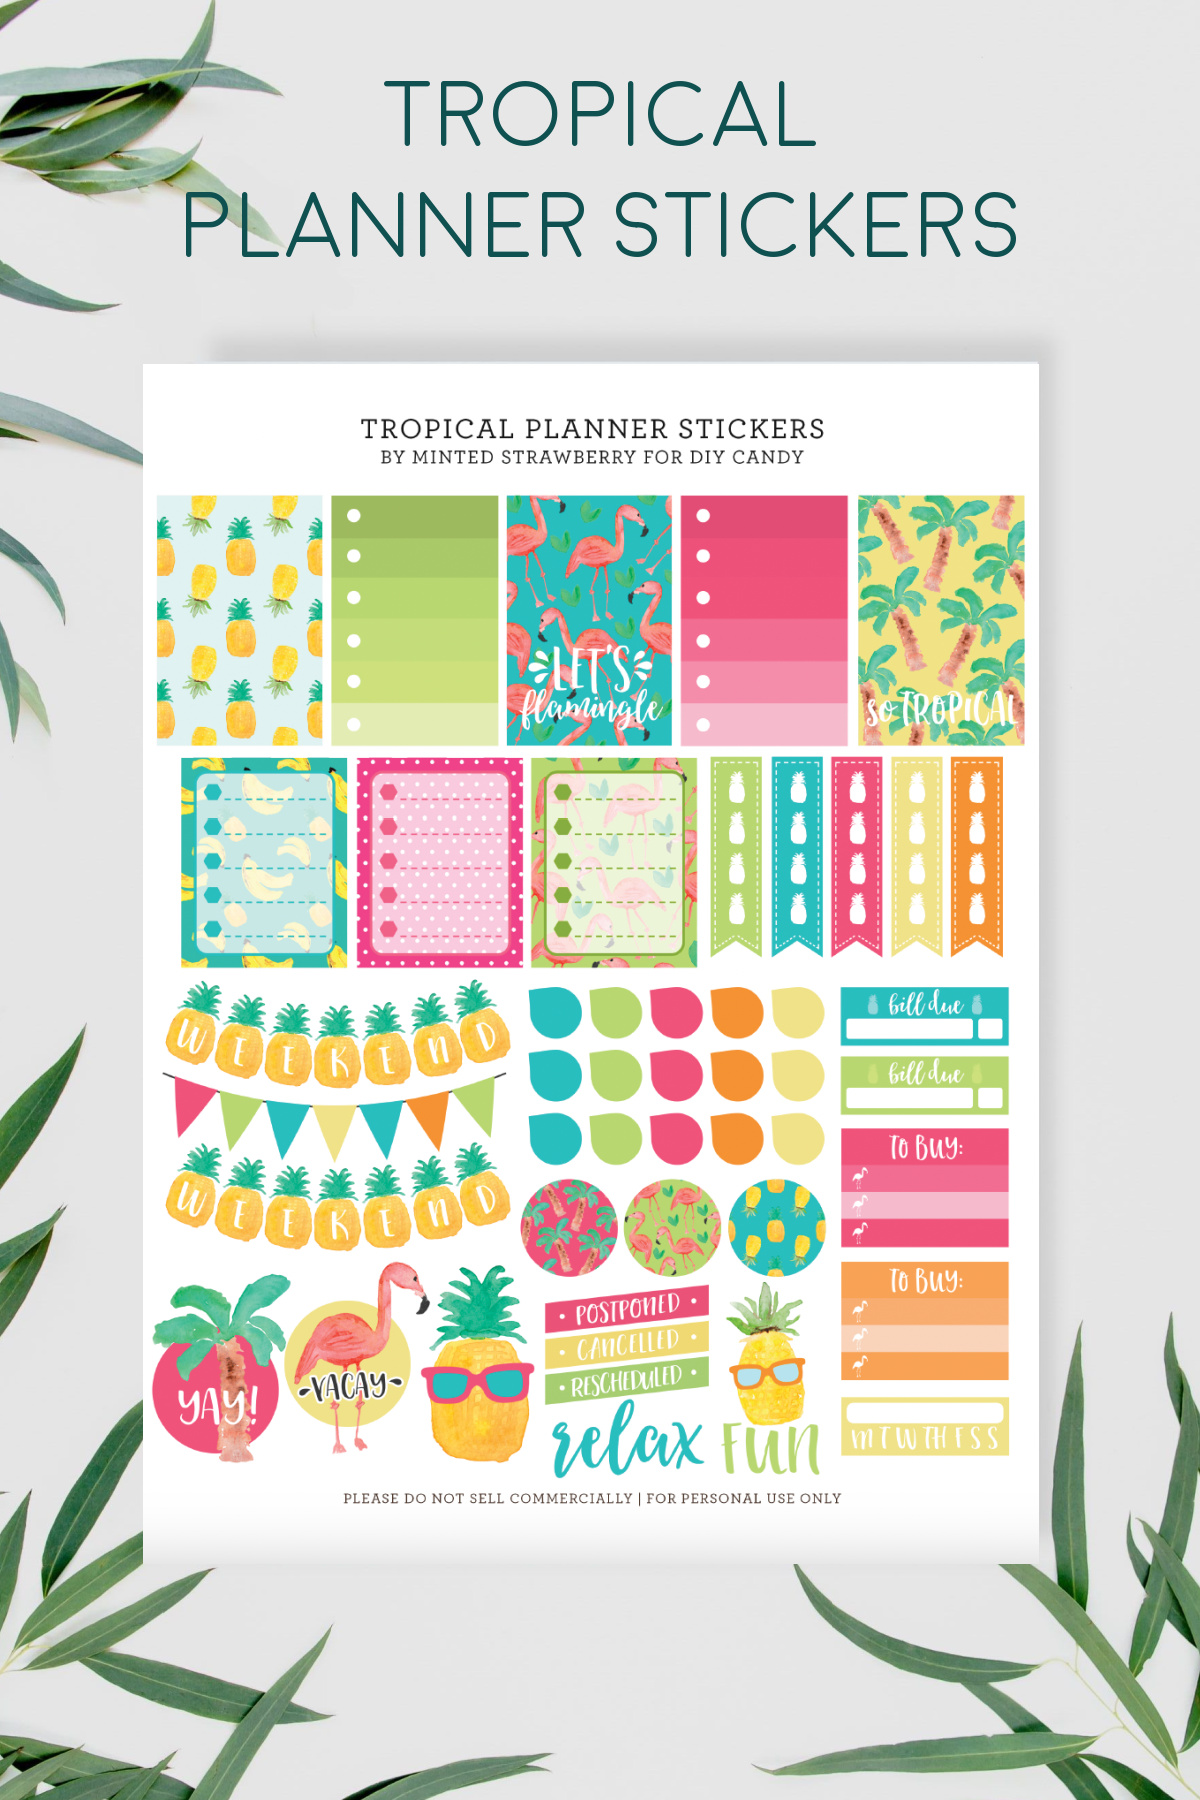 Tropical Planner Stickers to Celebrate Summer